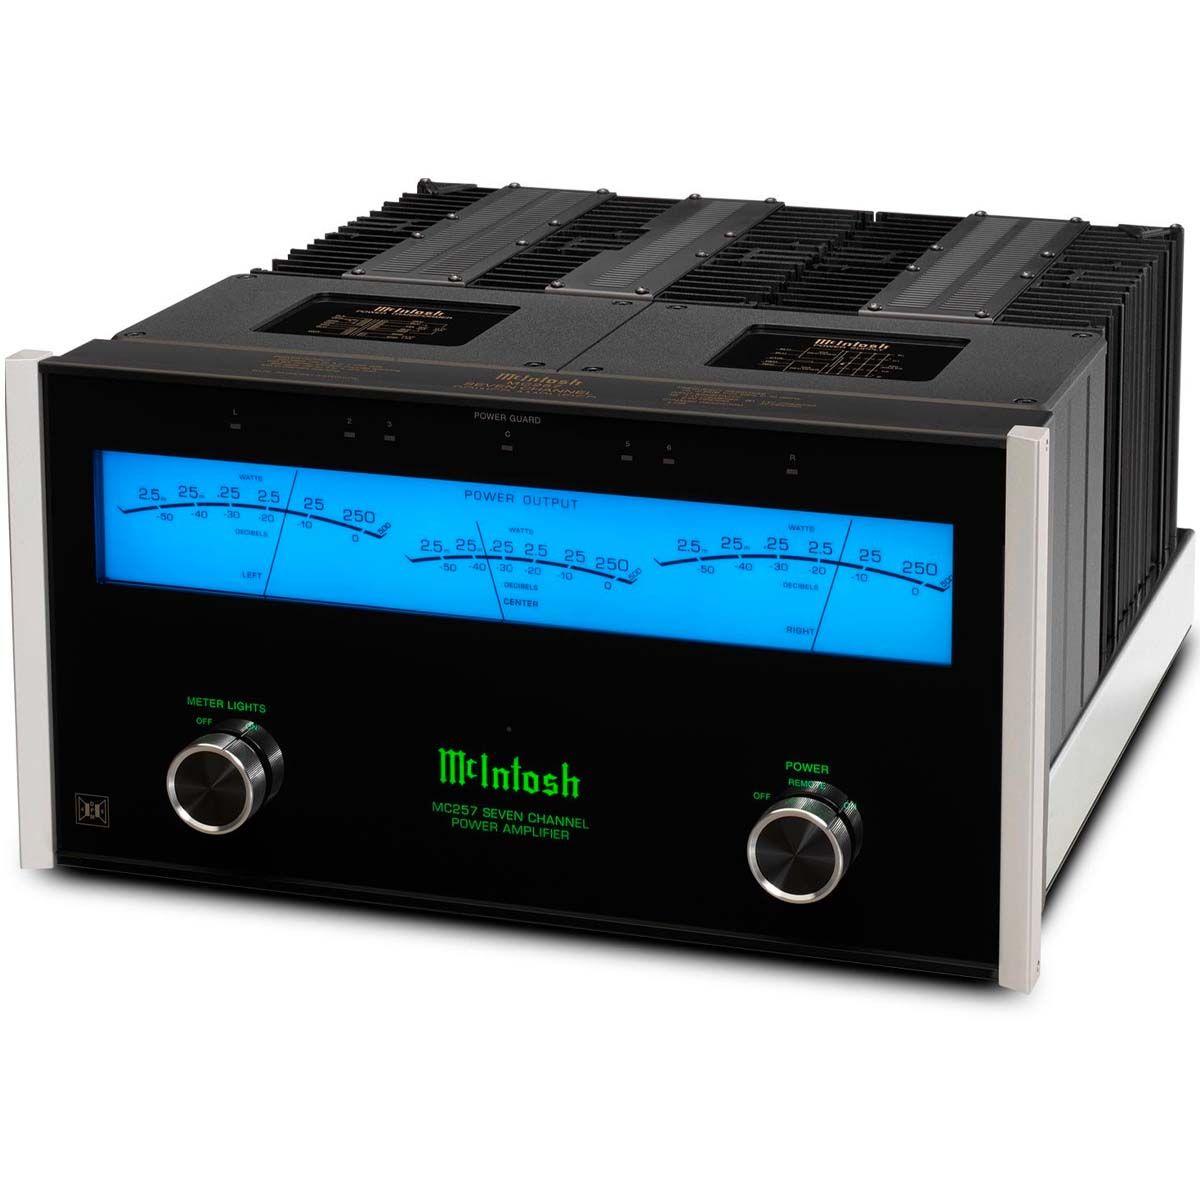 McIntosh MC257 7-channel Solid State Amplifier - angled front view